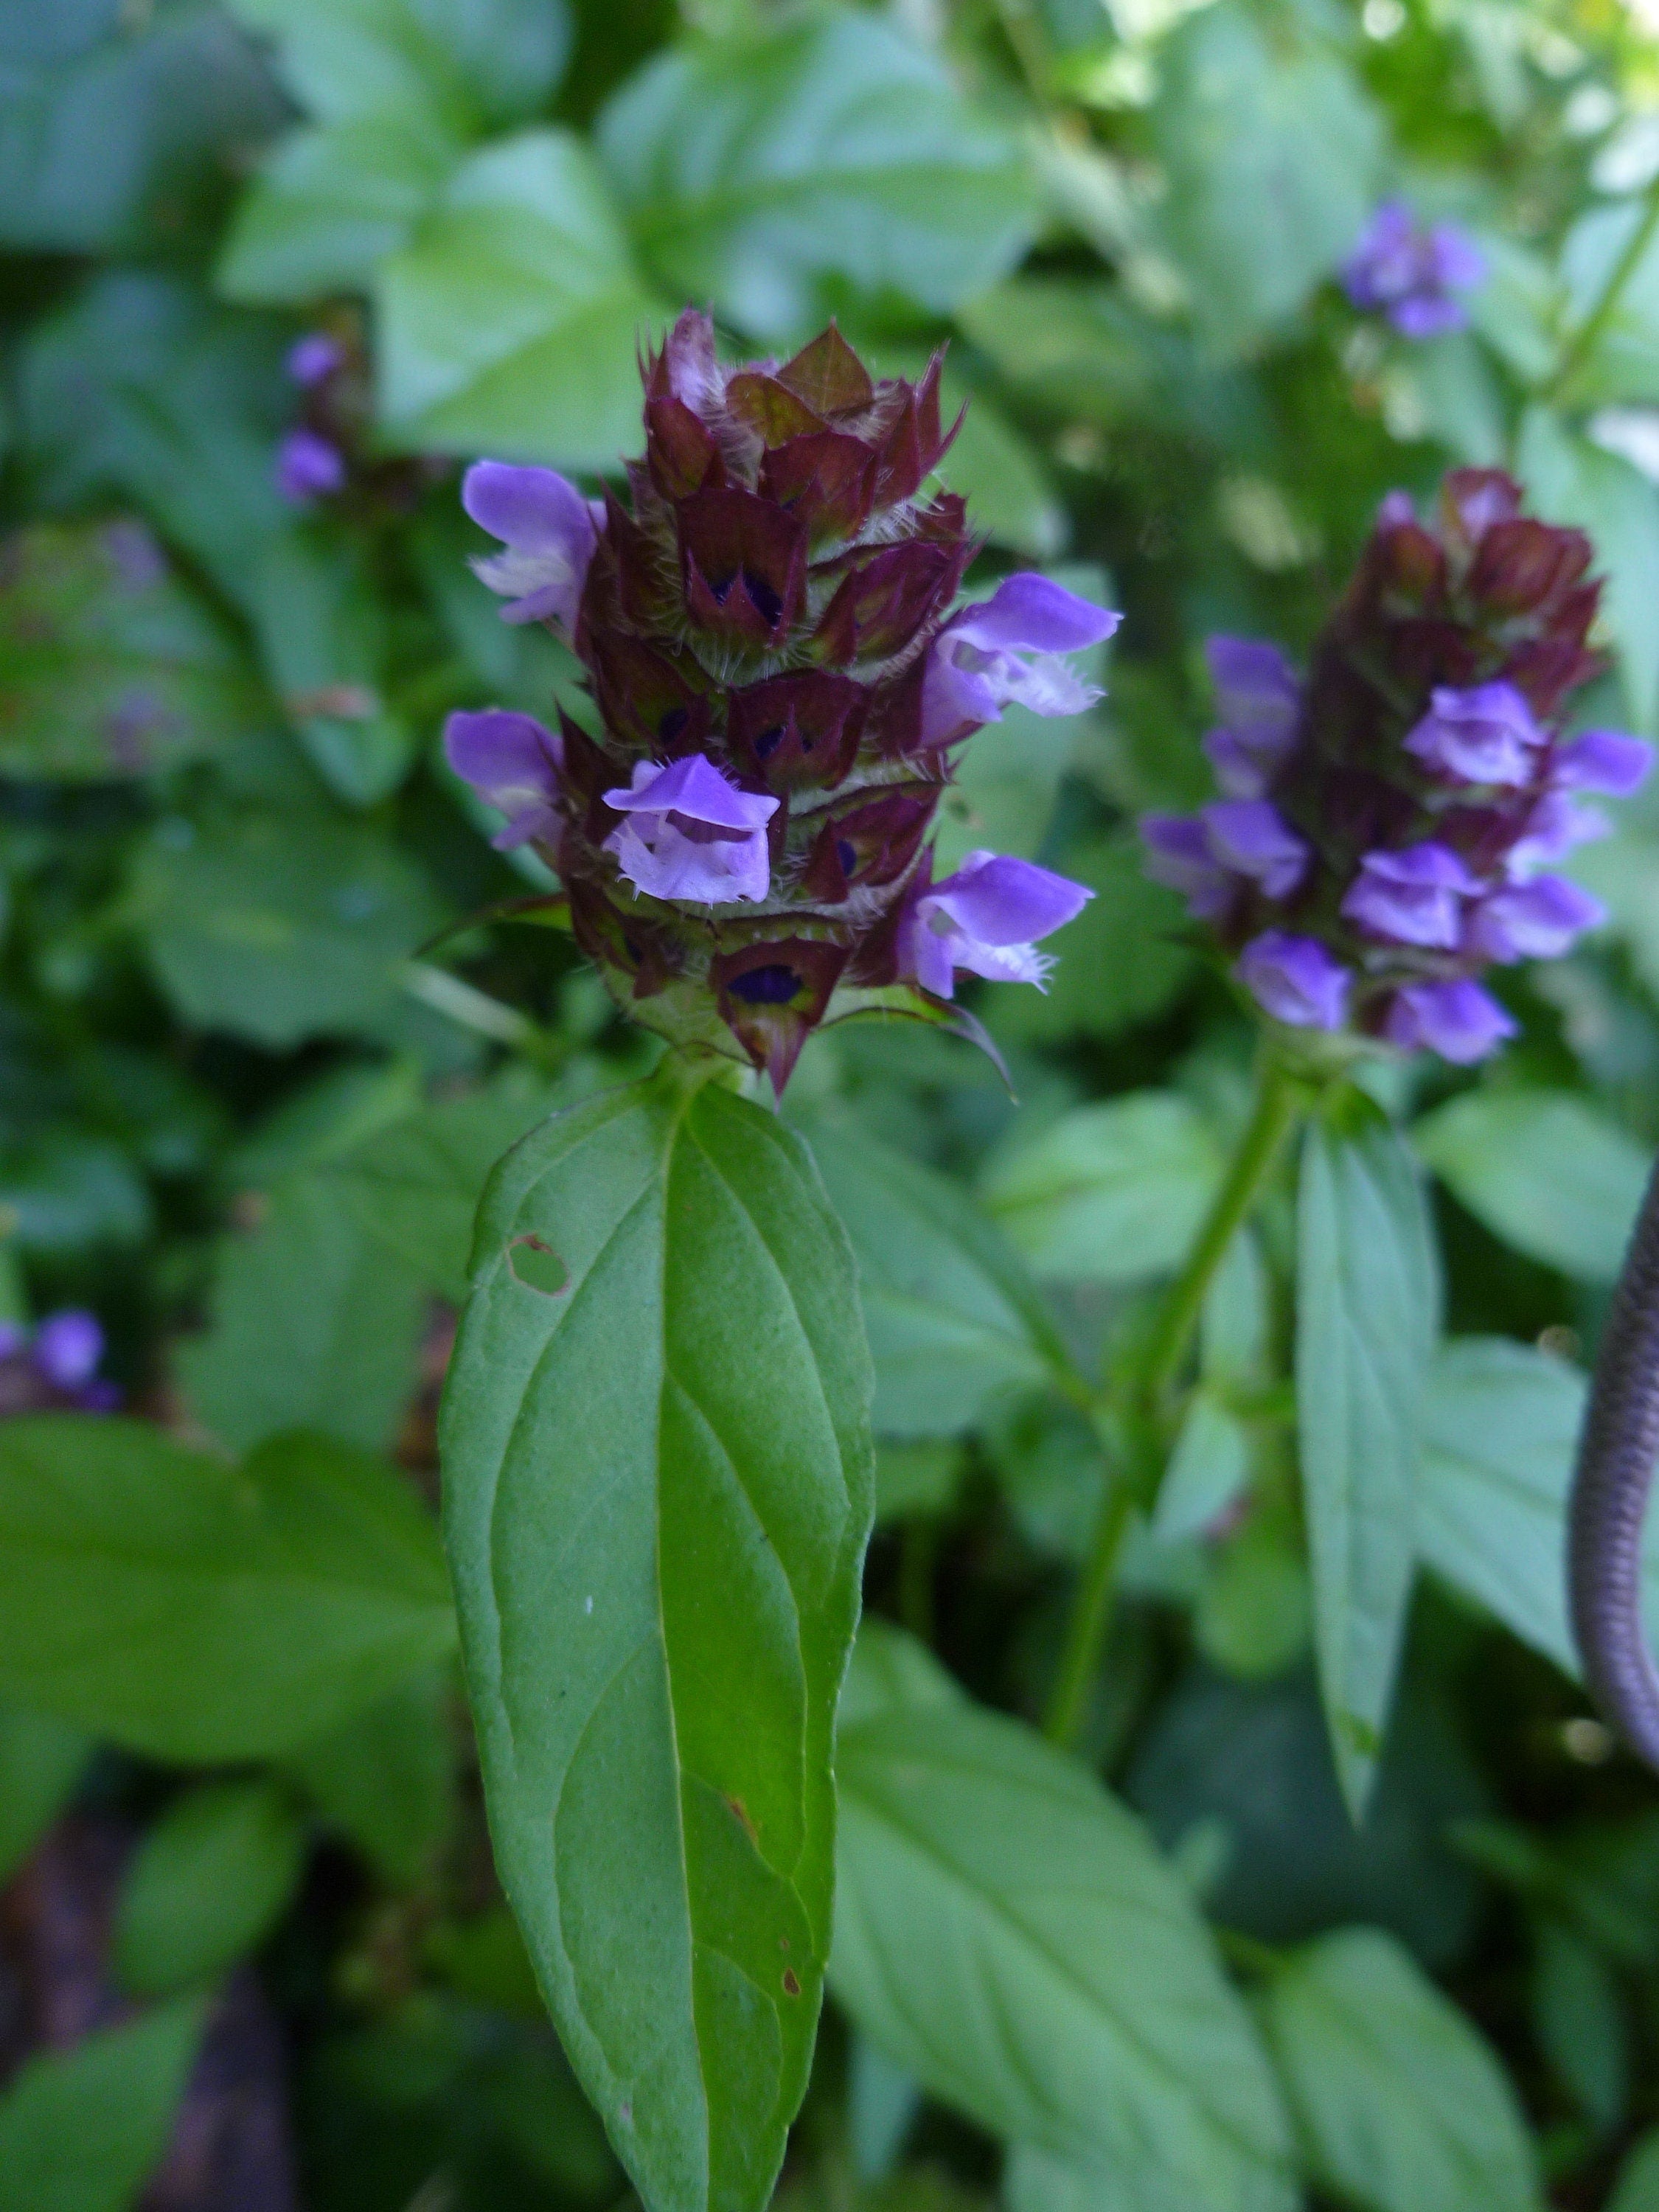 200+ Organic Self Heal Prunella Seeds- G063-Heal All Plant/Beautiful and Medicinal Plant./ Highly Useful